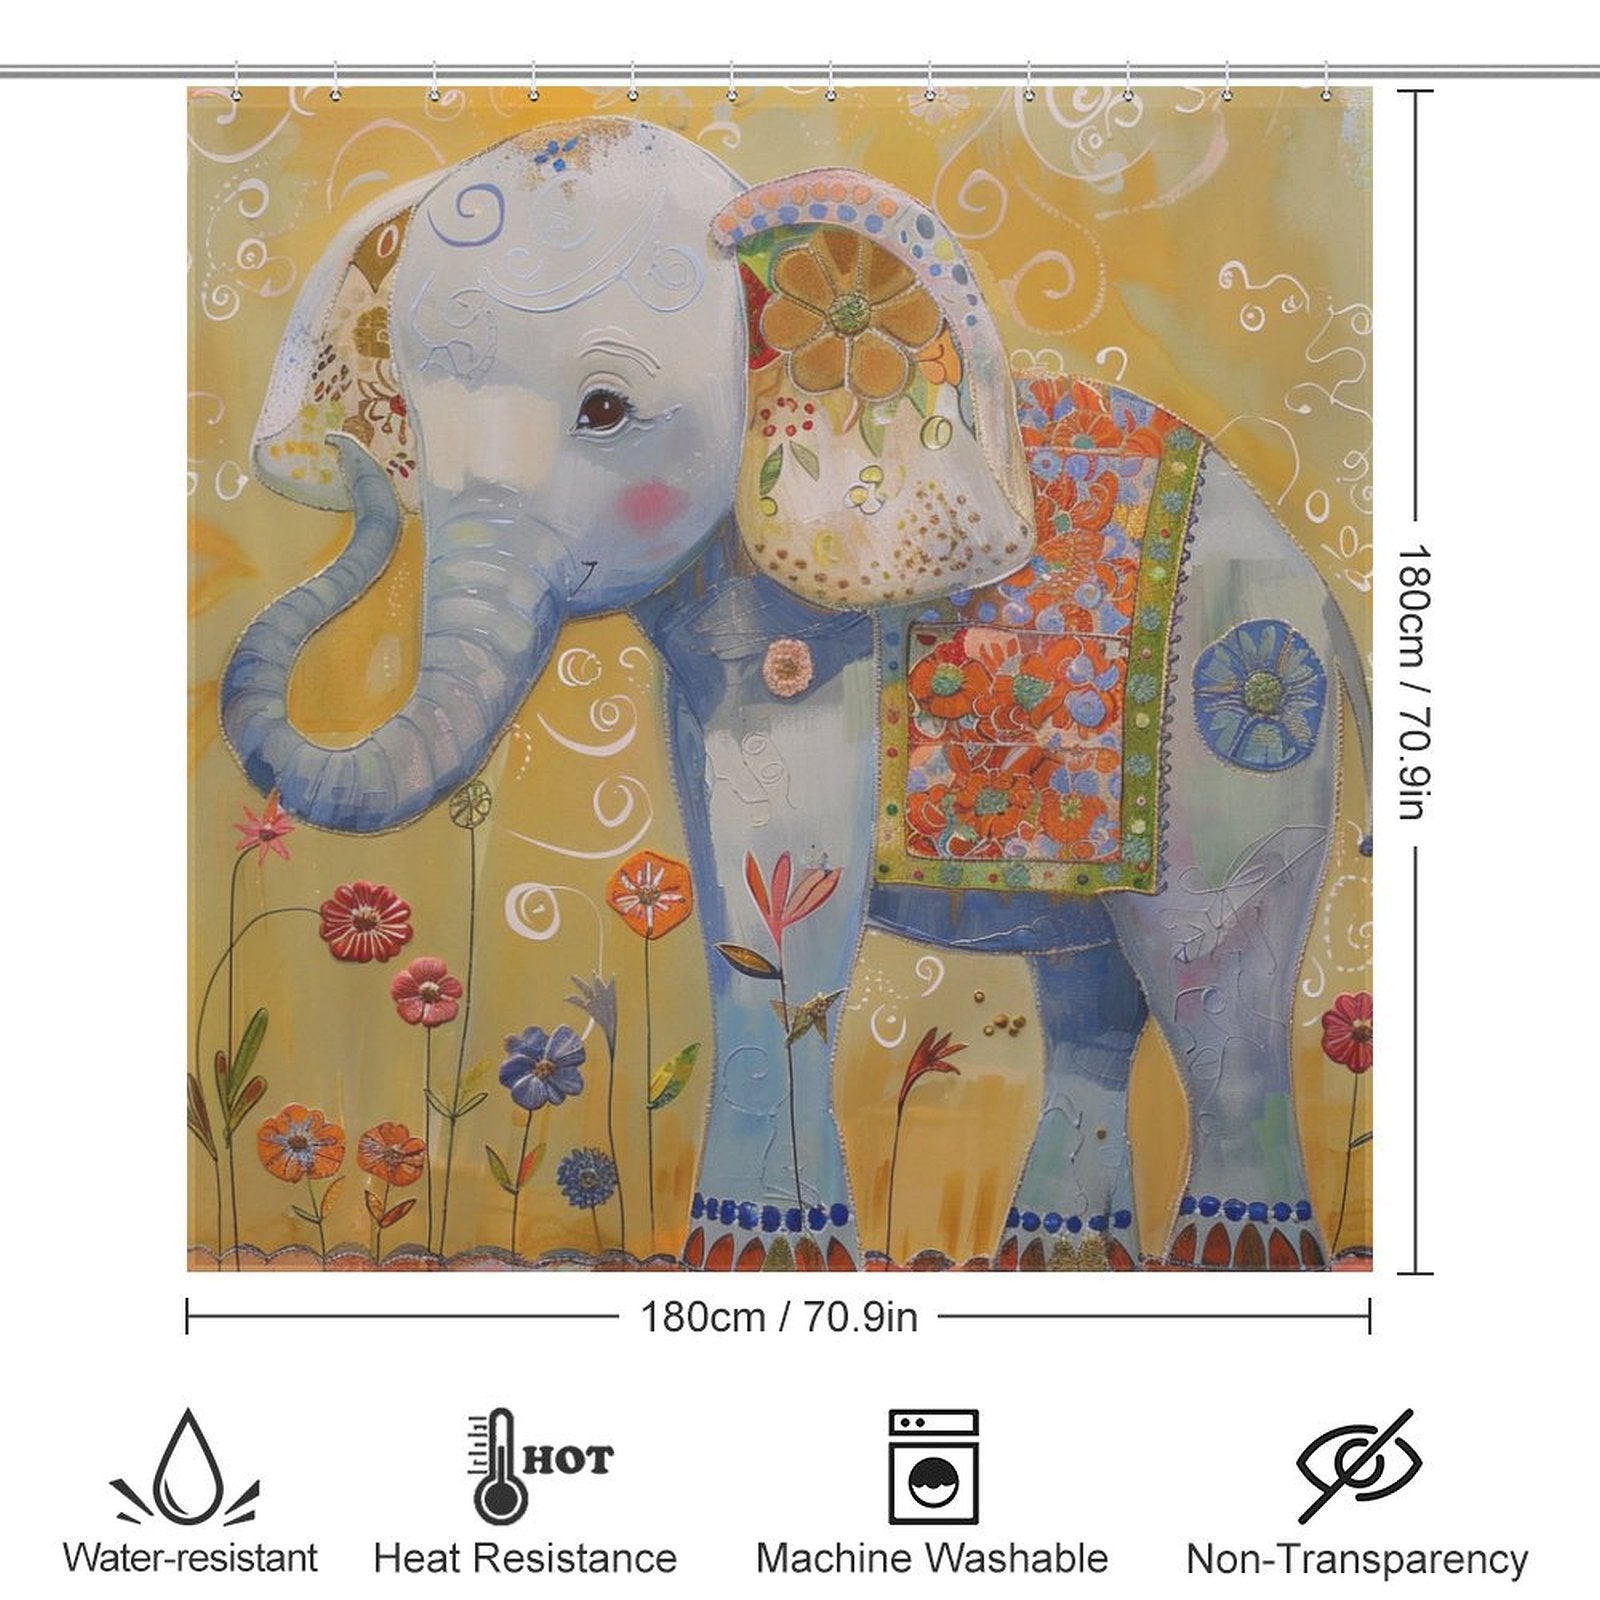 Artistic Cute Colourful Elephant Shower Curtain-Cottoncat by Cotton Cat, with floral patterns, measuring 180cm by 180cm. Features water-resistance, heat resistance, machine washability, and non-transparency.